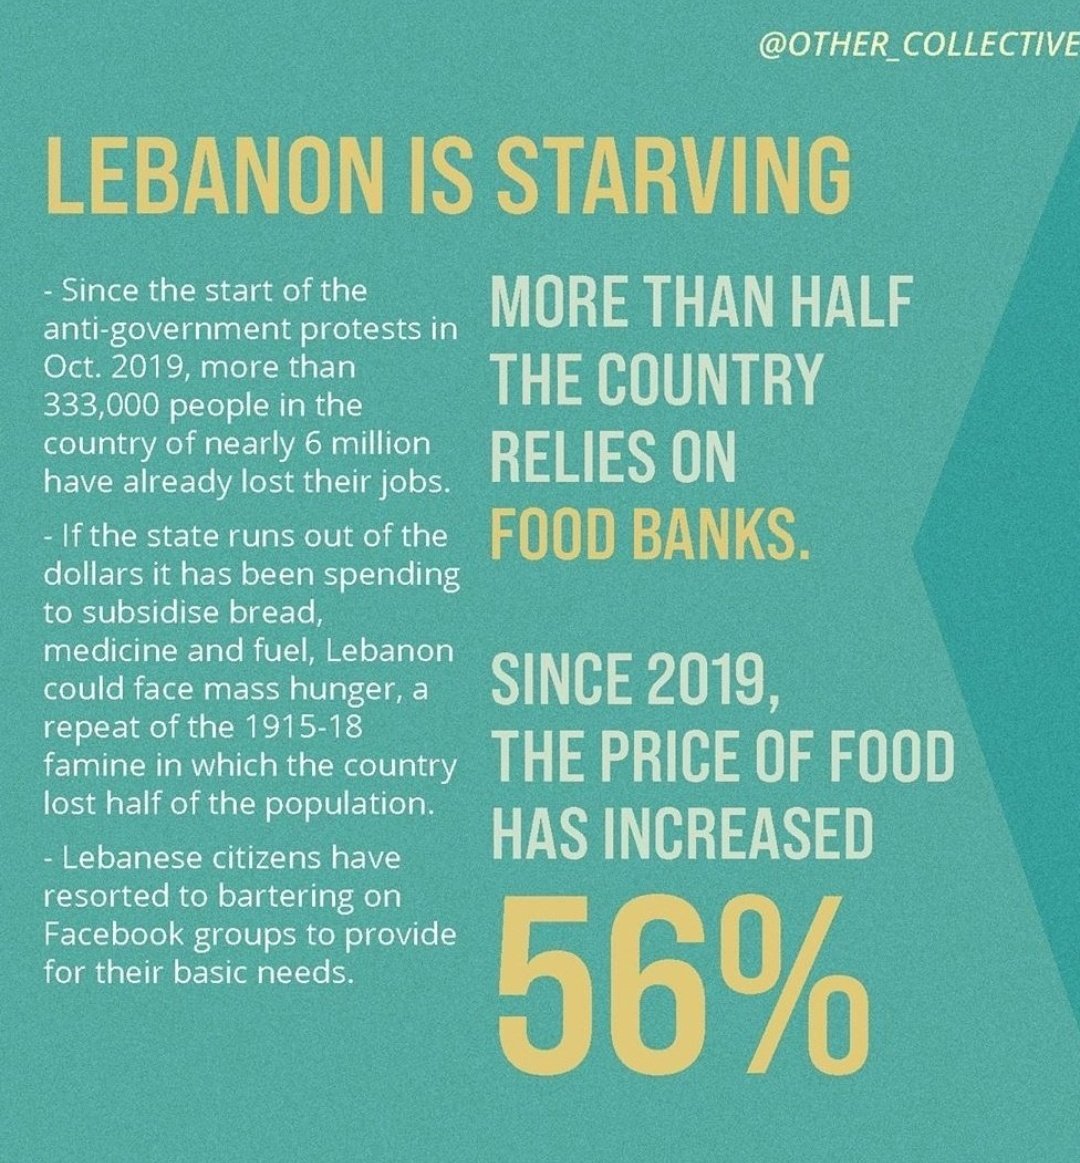 Here's what's happening in Lebanon. Please read 